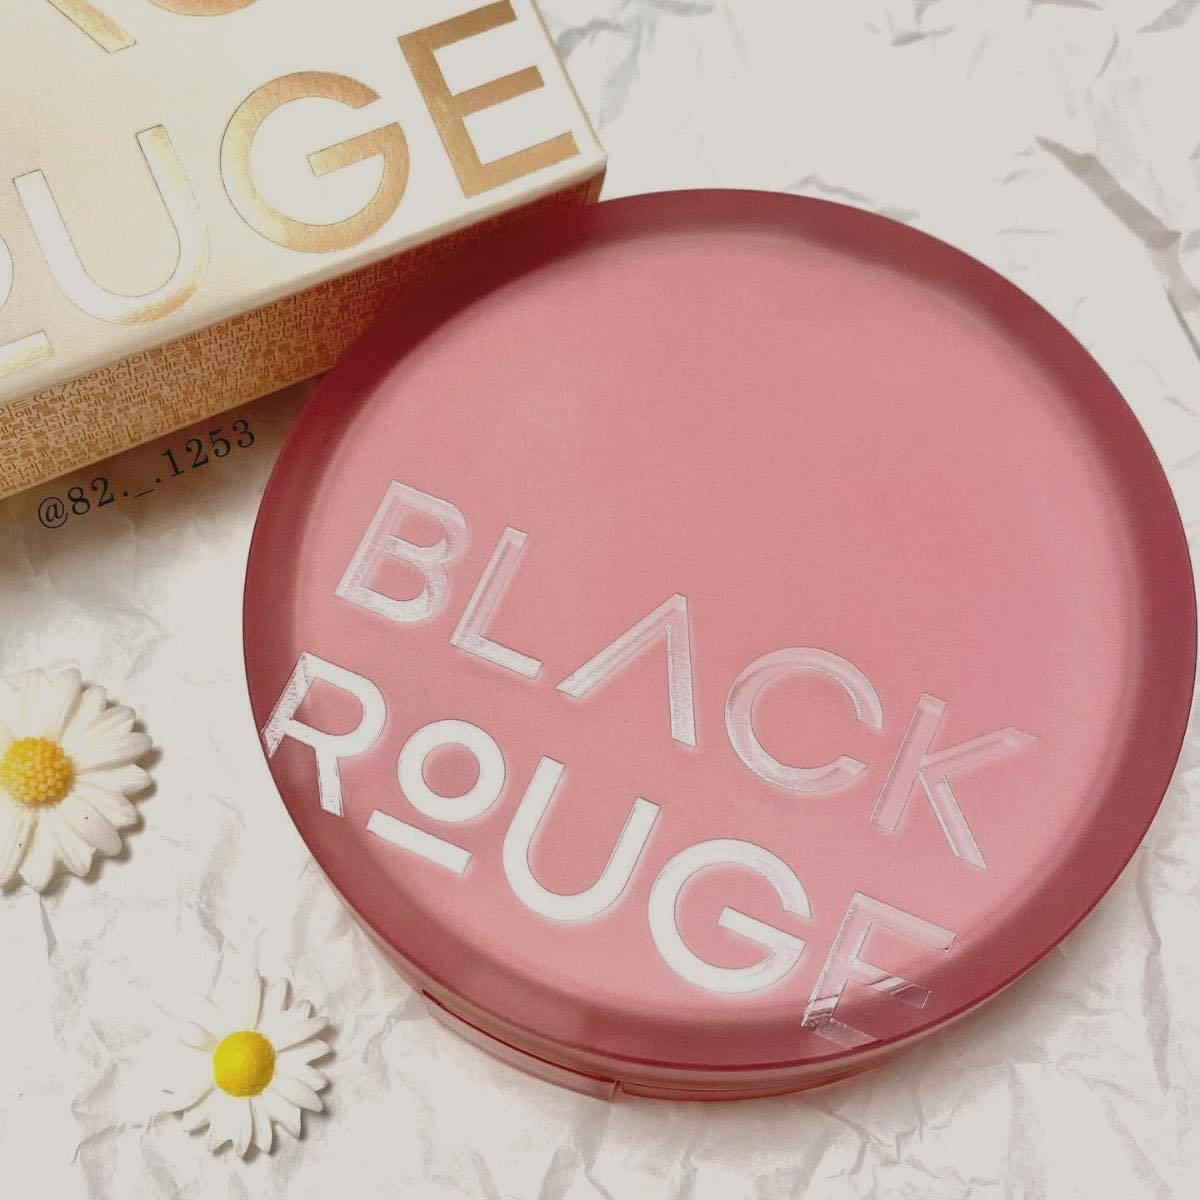 [Review] Black Rouge Thin Layer Velour Cushion 7